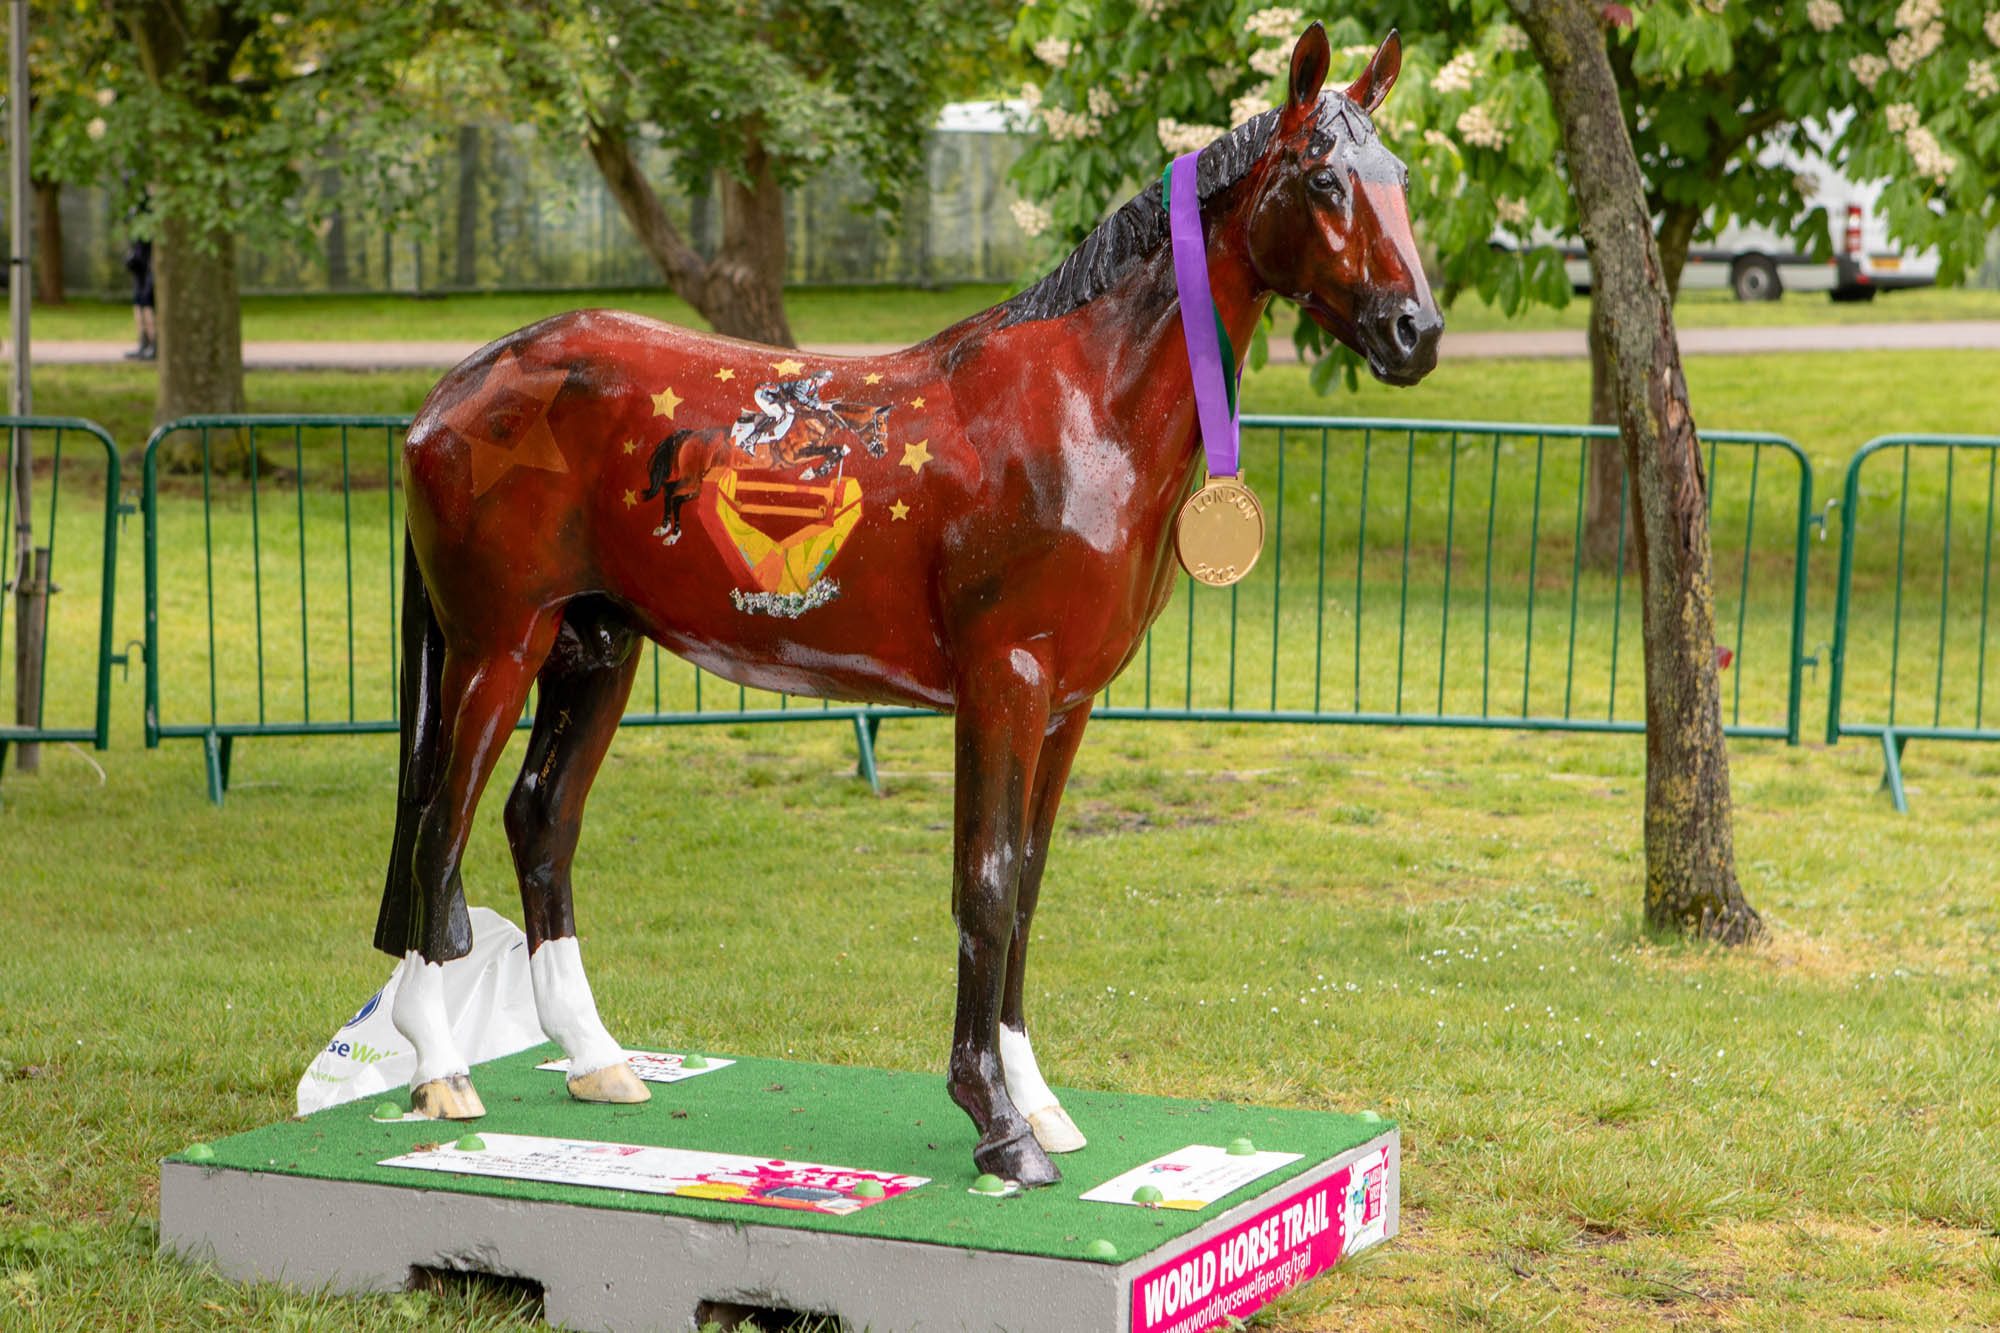 World Horse Trail sculpture trail launched